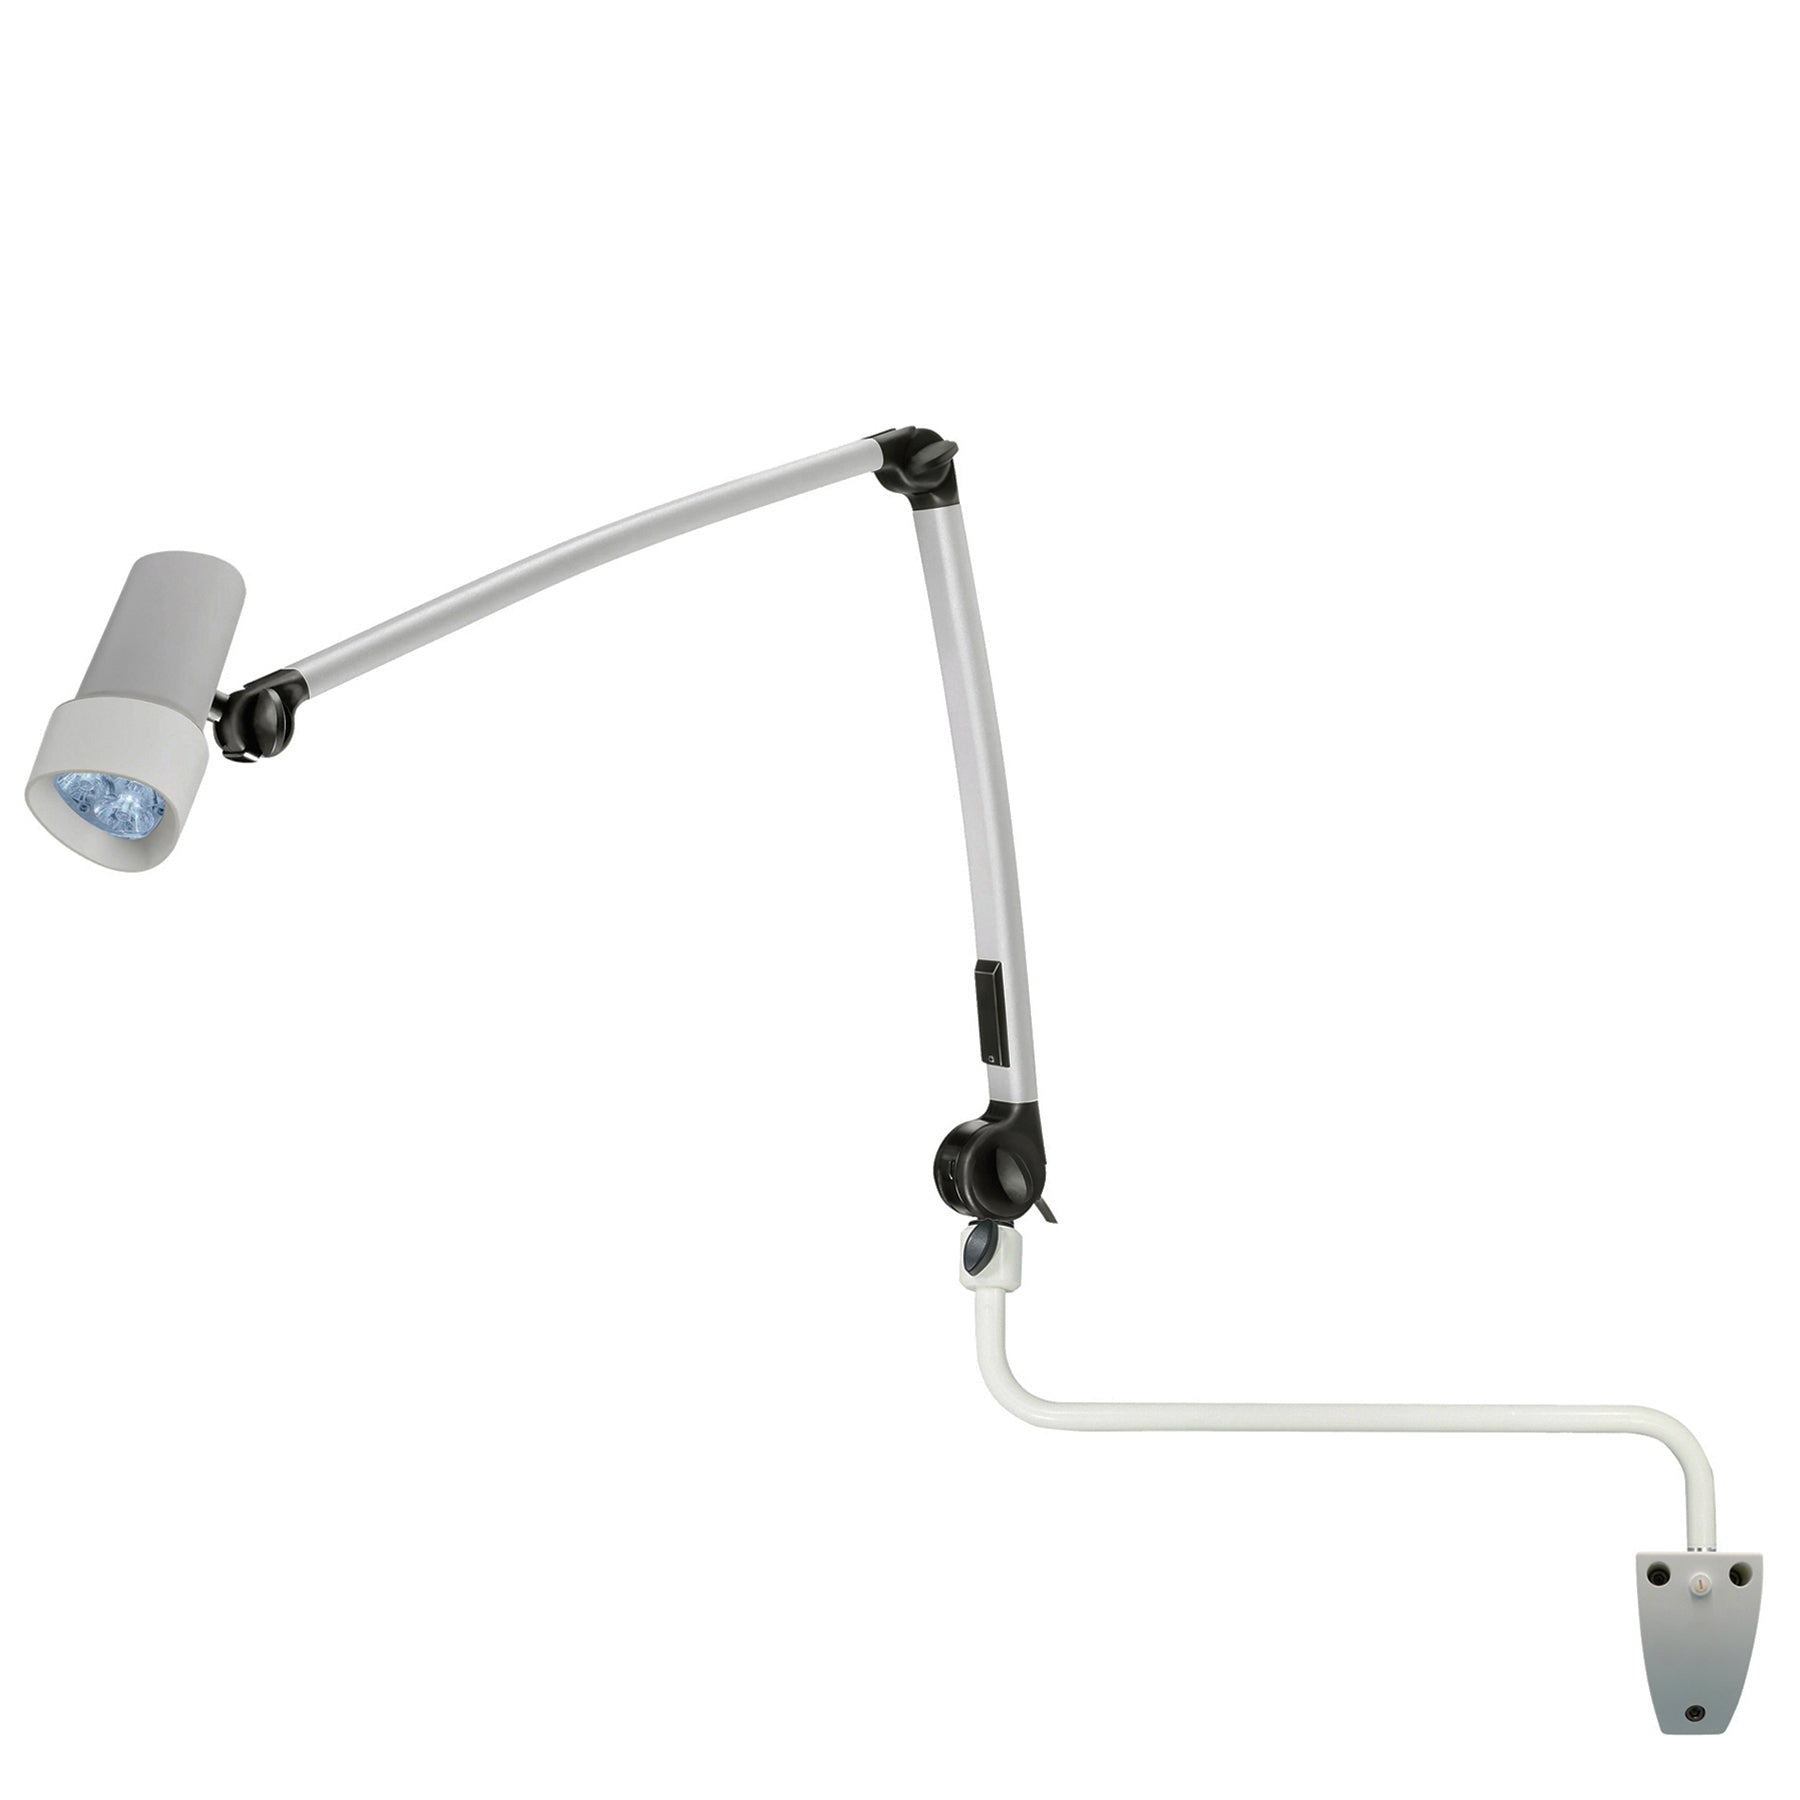 Derungs D15994930 Halux LED N30-1 P F1, Reading, Double Arm - Wall Extension Mount